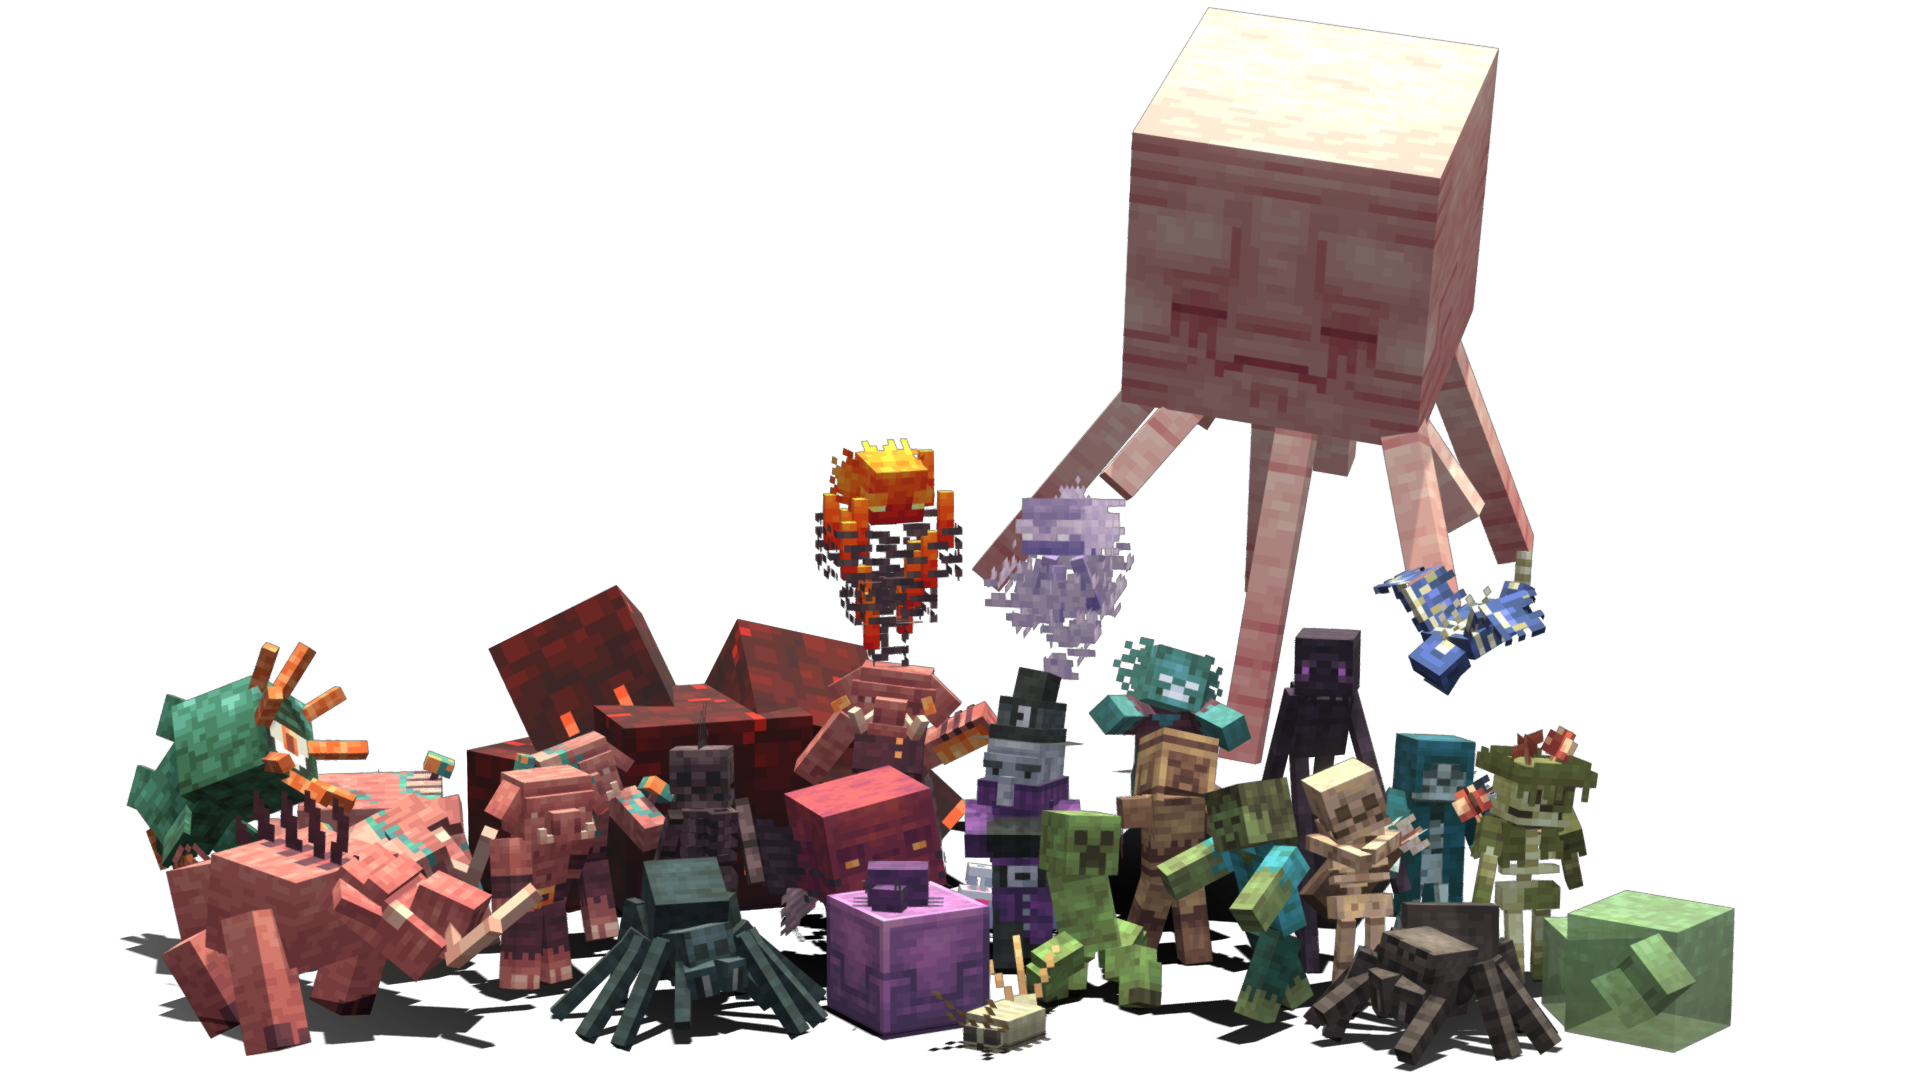 All Mobs